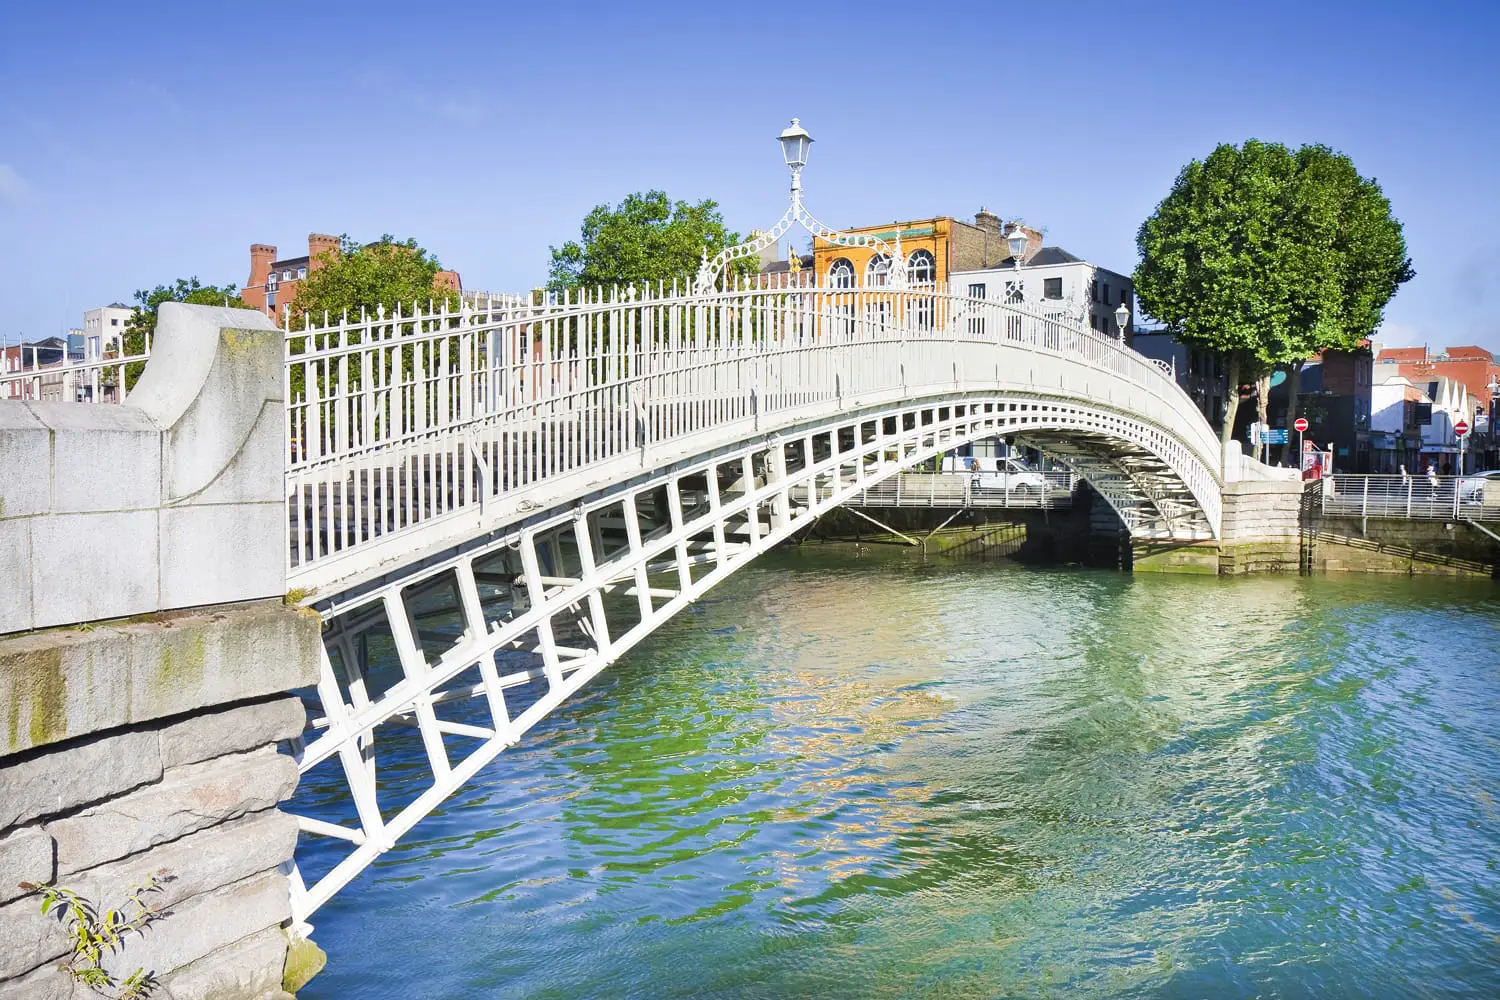 The most famous bridge in Dublin called "Half penny bridge" due to the toll charged for the passage